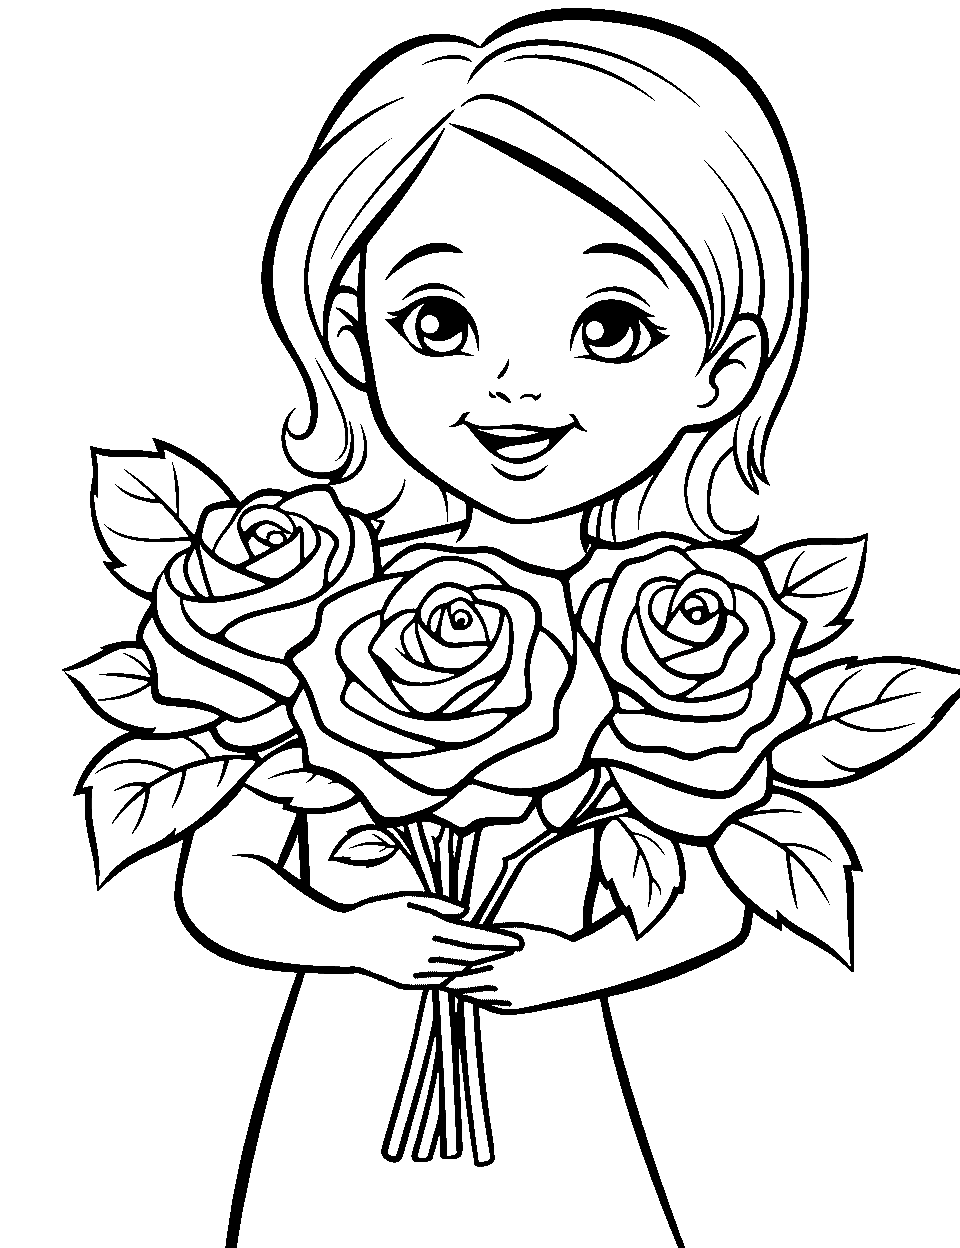 Girl Holding a Rose Bouquet Coloring Page - A young girl gently holding a bouquet of fresh roses, smiling softly.